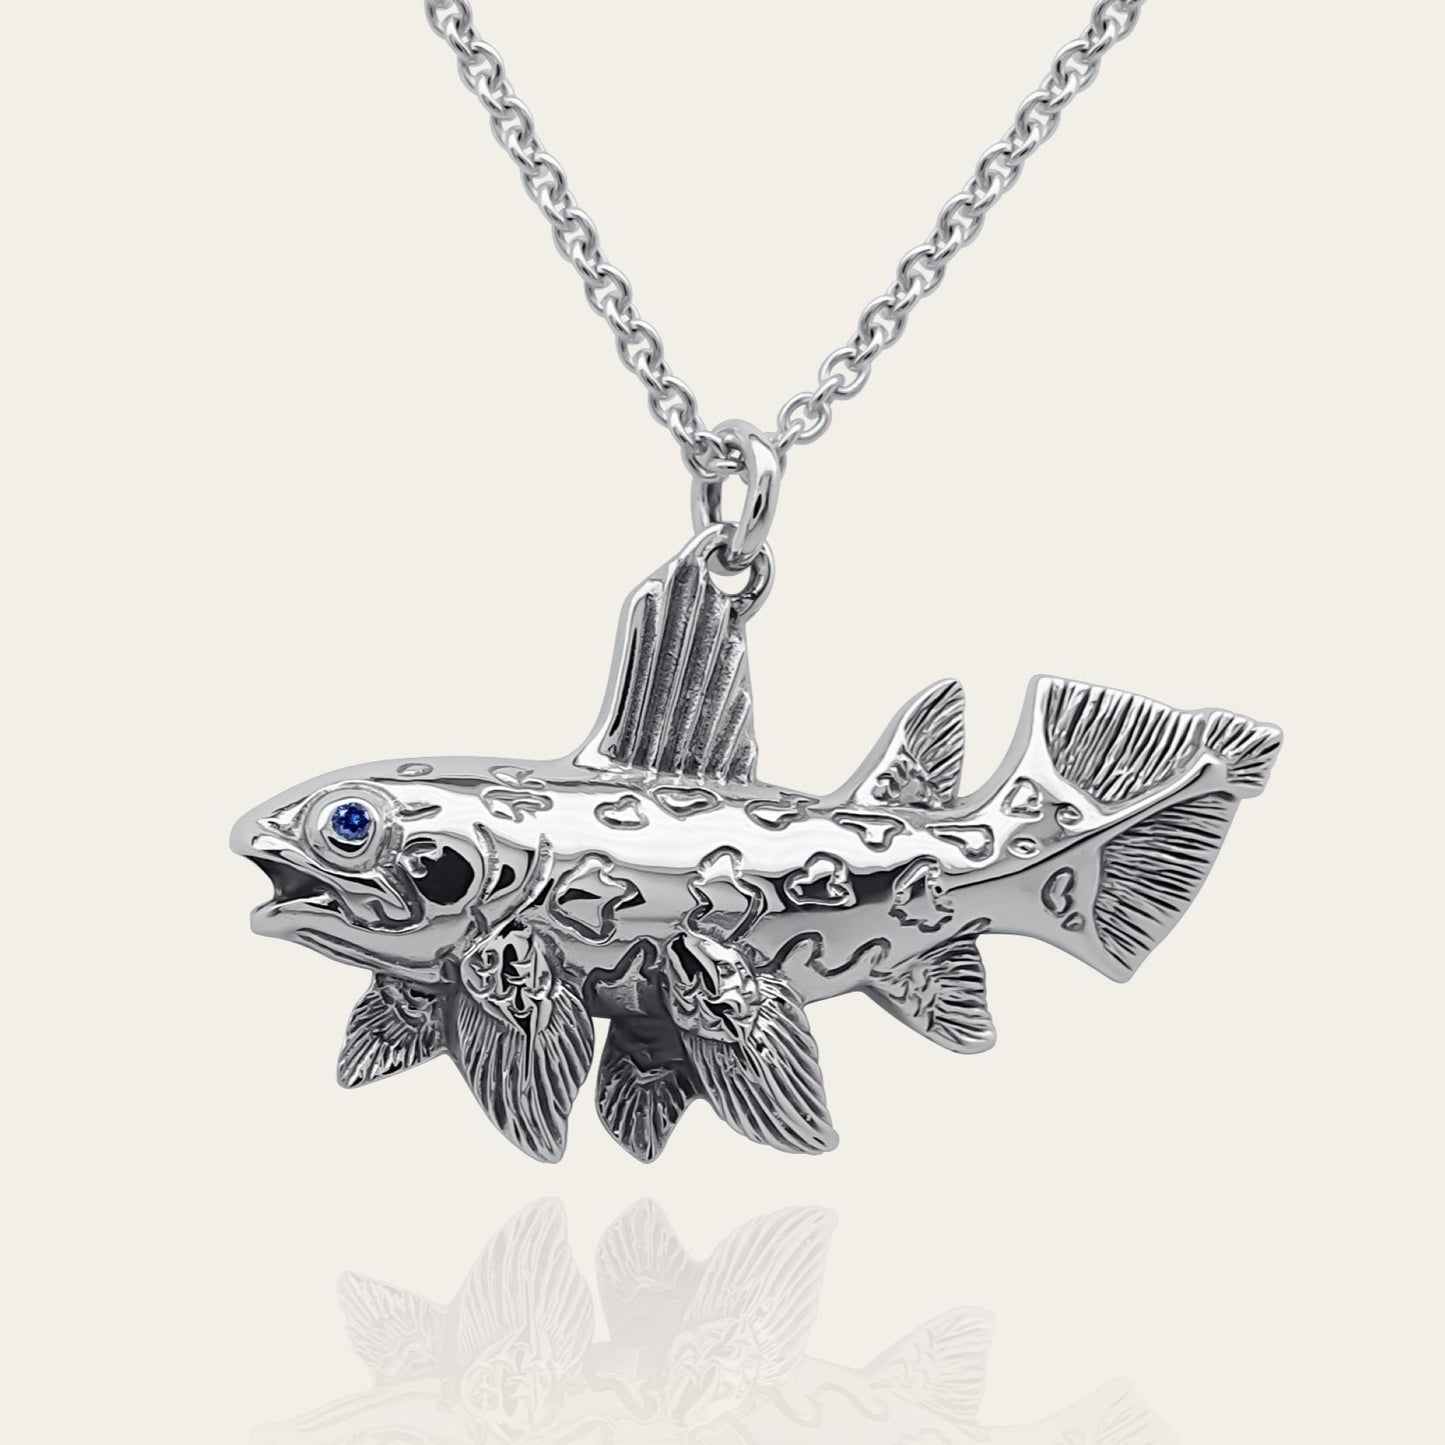 Coelacanth necklace. Made from sterling silver with an antiqued finish, set with a gemstone eye. Prehistoric fish pendant © Adrian Ashley